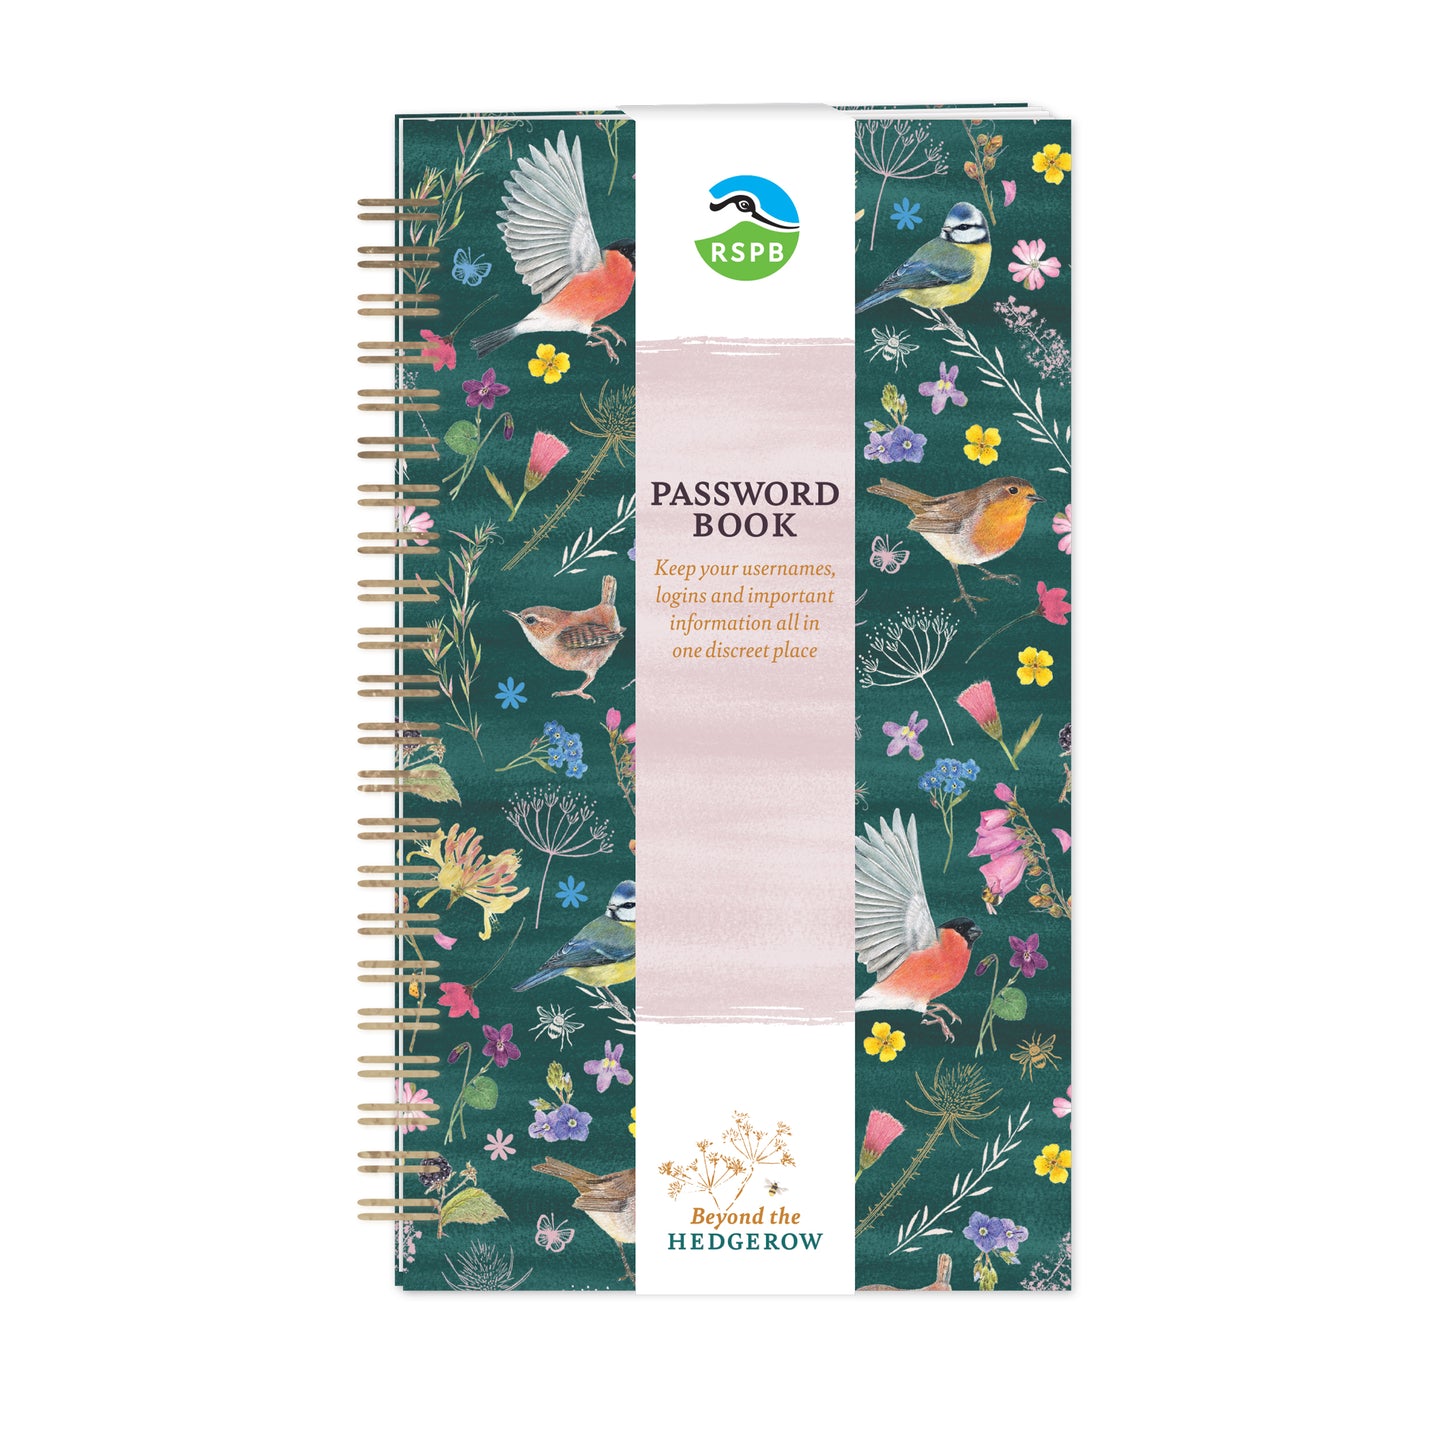 RSPB Beyond The Hedgerow Stationery - Password Book - Birds in the Garden